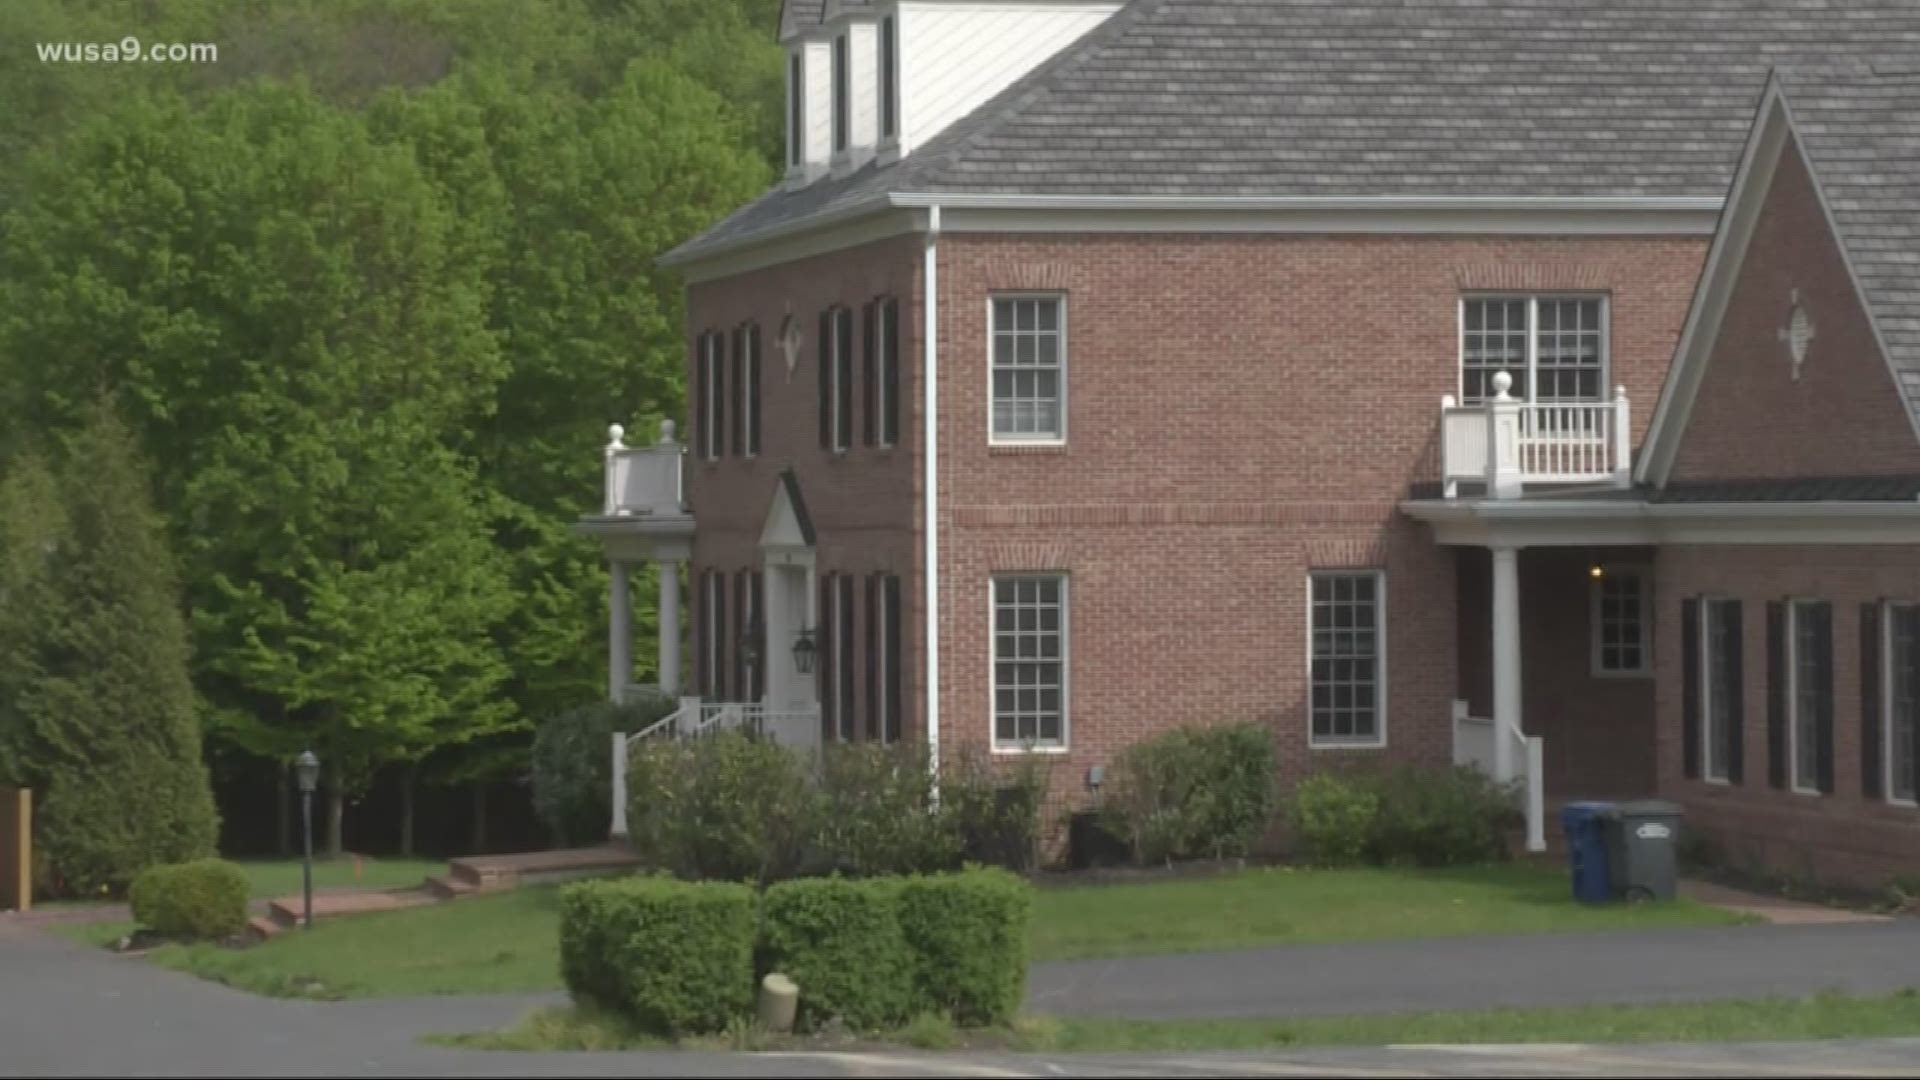 The McLean community was surprised by the purchase of three luxury homes now being converted into a high-priced teen drug rehab center.